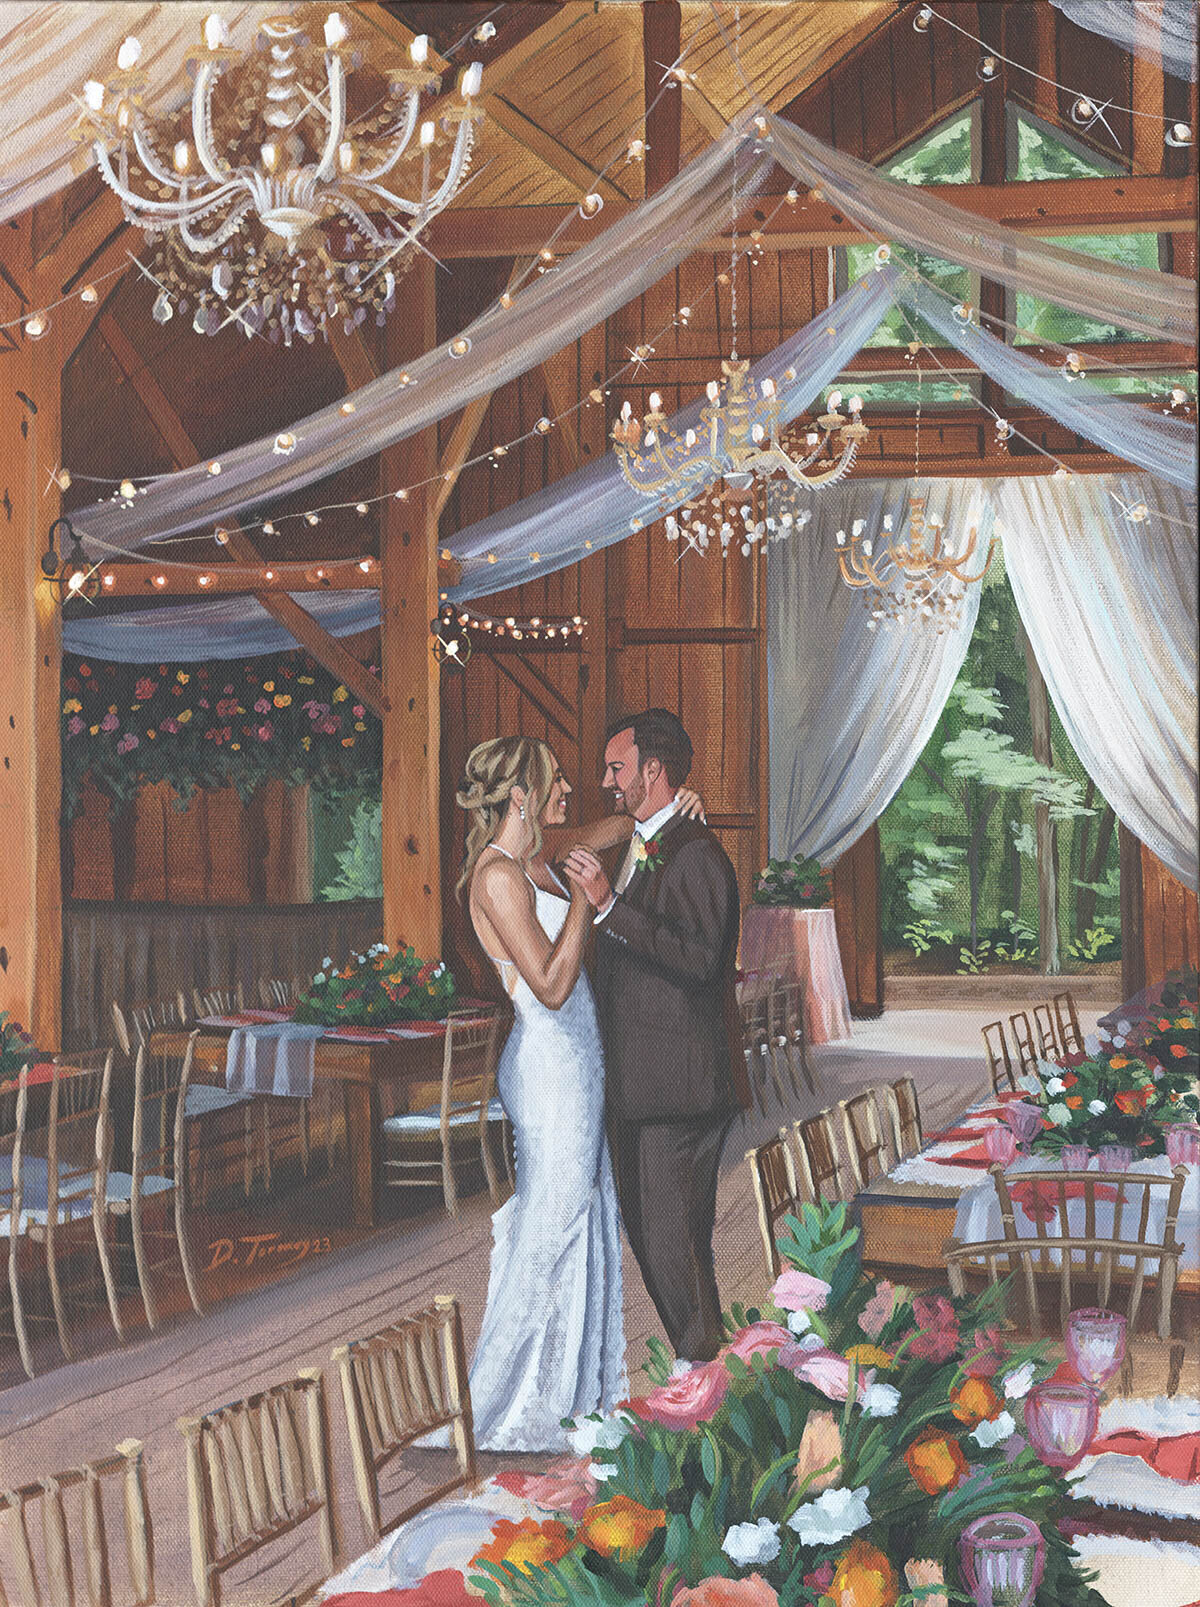 Painting of a first dance